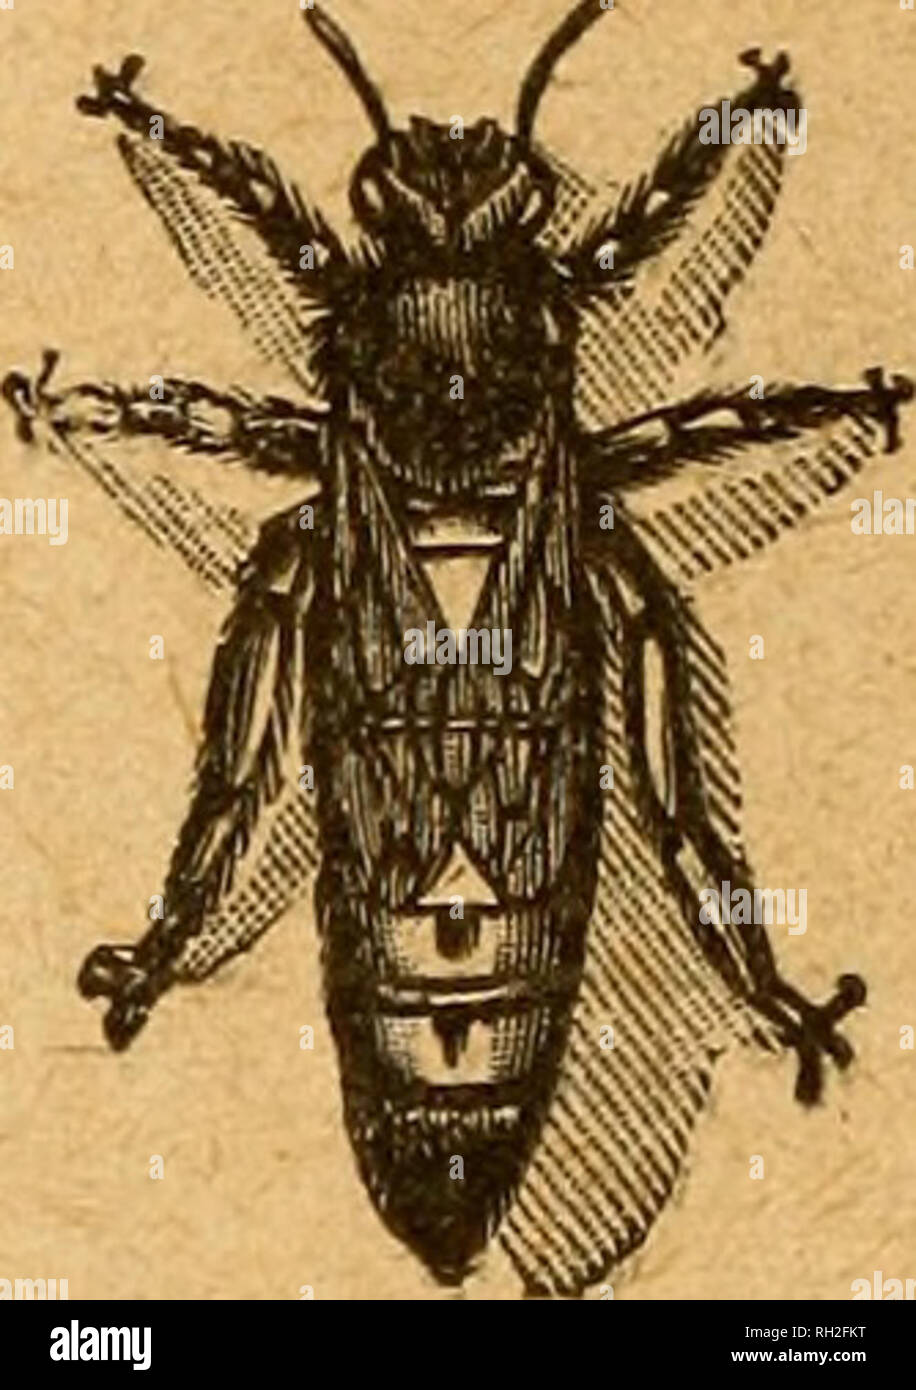 . British bee journal &amp; bee-keepers adviser. Bees. 396 THE BRITISH BEE JOURNAL. Aug. 12,1920 1Q9A FERTILS Oold«n Italian Qneena, XfJ^yj guaranteed imported direct from Italy, regular supplies every few days, lOs. each; specially selected, 14s.—GQODAEE, New Cross, Wedneefield. f.69 &quot;T8LB OP WIGHT&quot; DISEASE.—Don't worry; X use the eolation that cures; as. per bottle.— B. PRESSET, fit. Elmo, Couledon. r.d.l49 AVE YOU BEAD &quot;THE BEE WOELD&quot;» If not, why notf Bveiry number in Itsell ia a useful literary work for practice and reference. Specimen copy free.—Offices: THE APIS CLUB Stock Photo